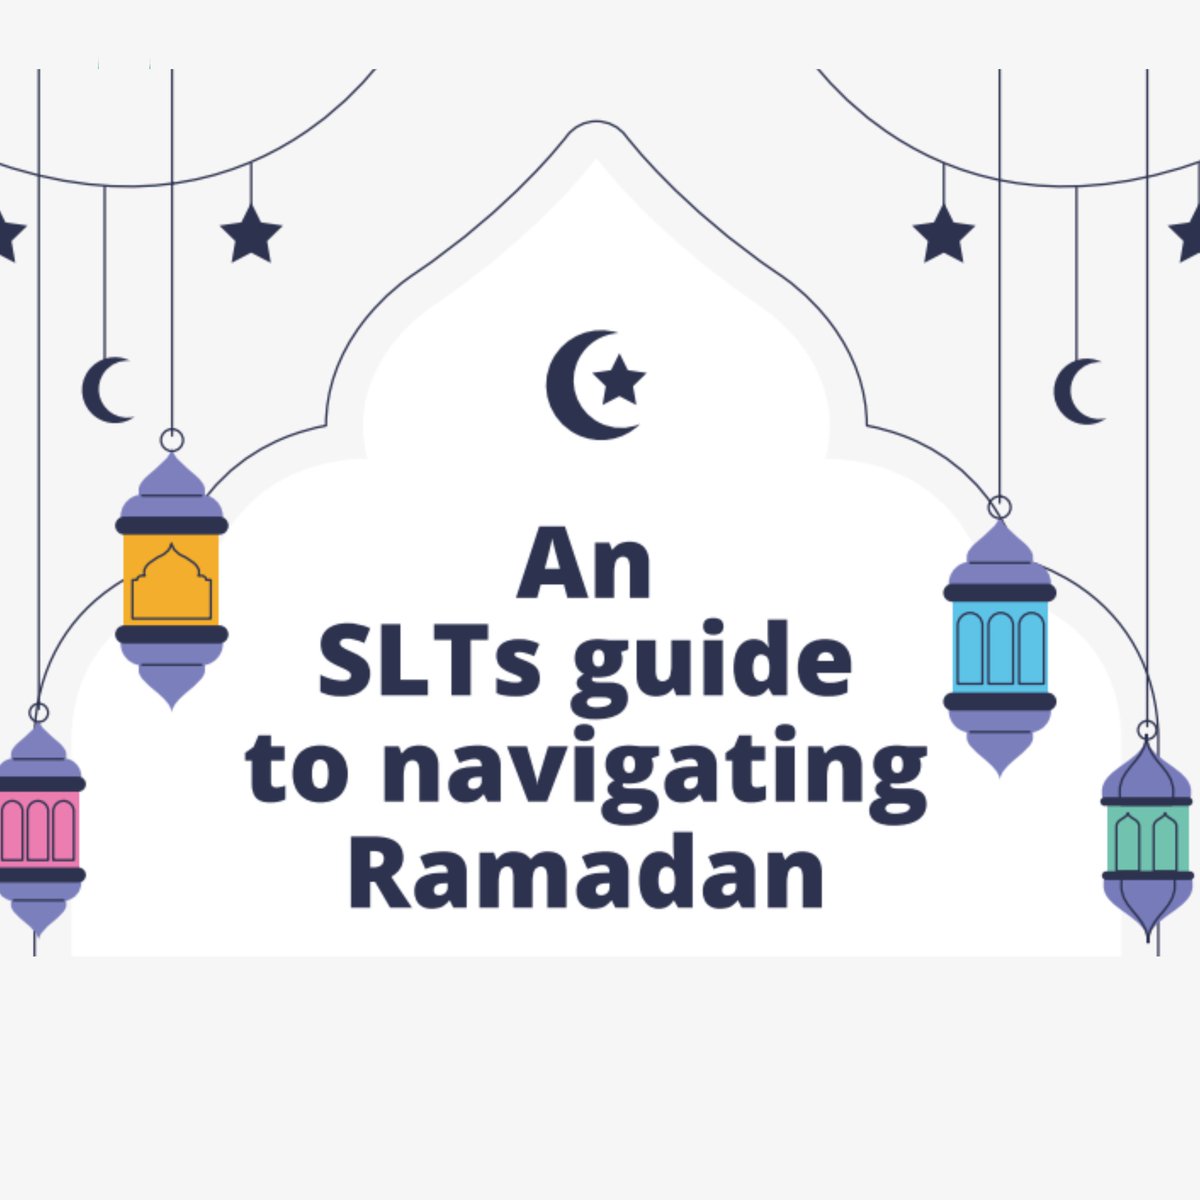 📢 Just in time for Ramadan starting March 10th, @RCSLT has released a guide for Speech and Language Therapists. Check it out for tips on supporting clients during Ramadan: rcslt.org/wp-content/upl…